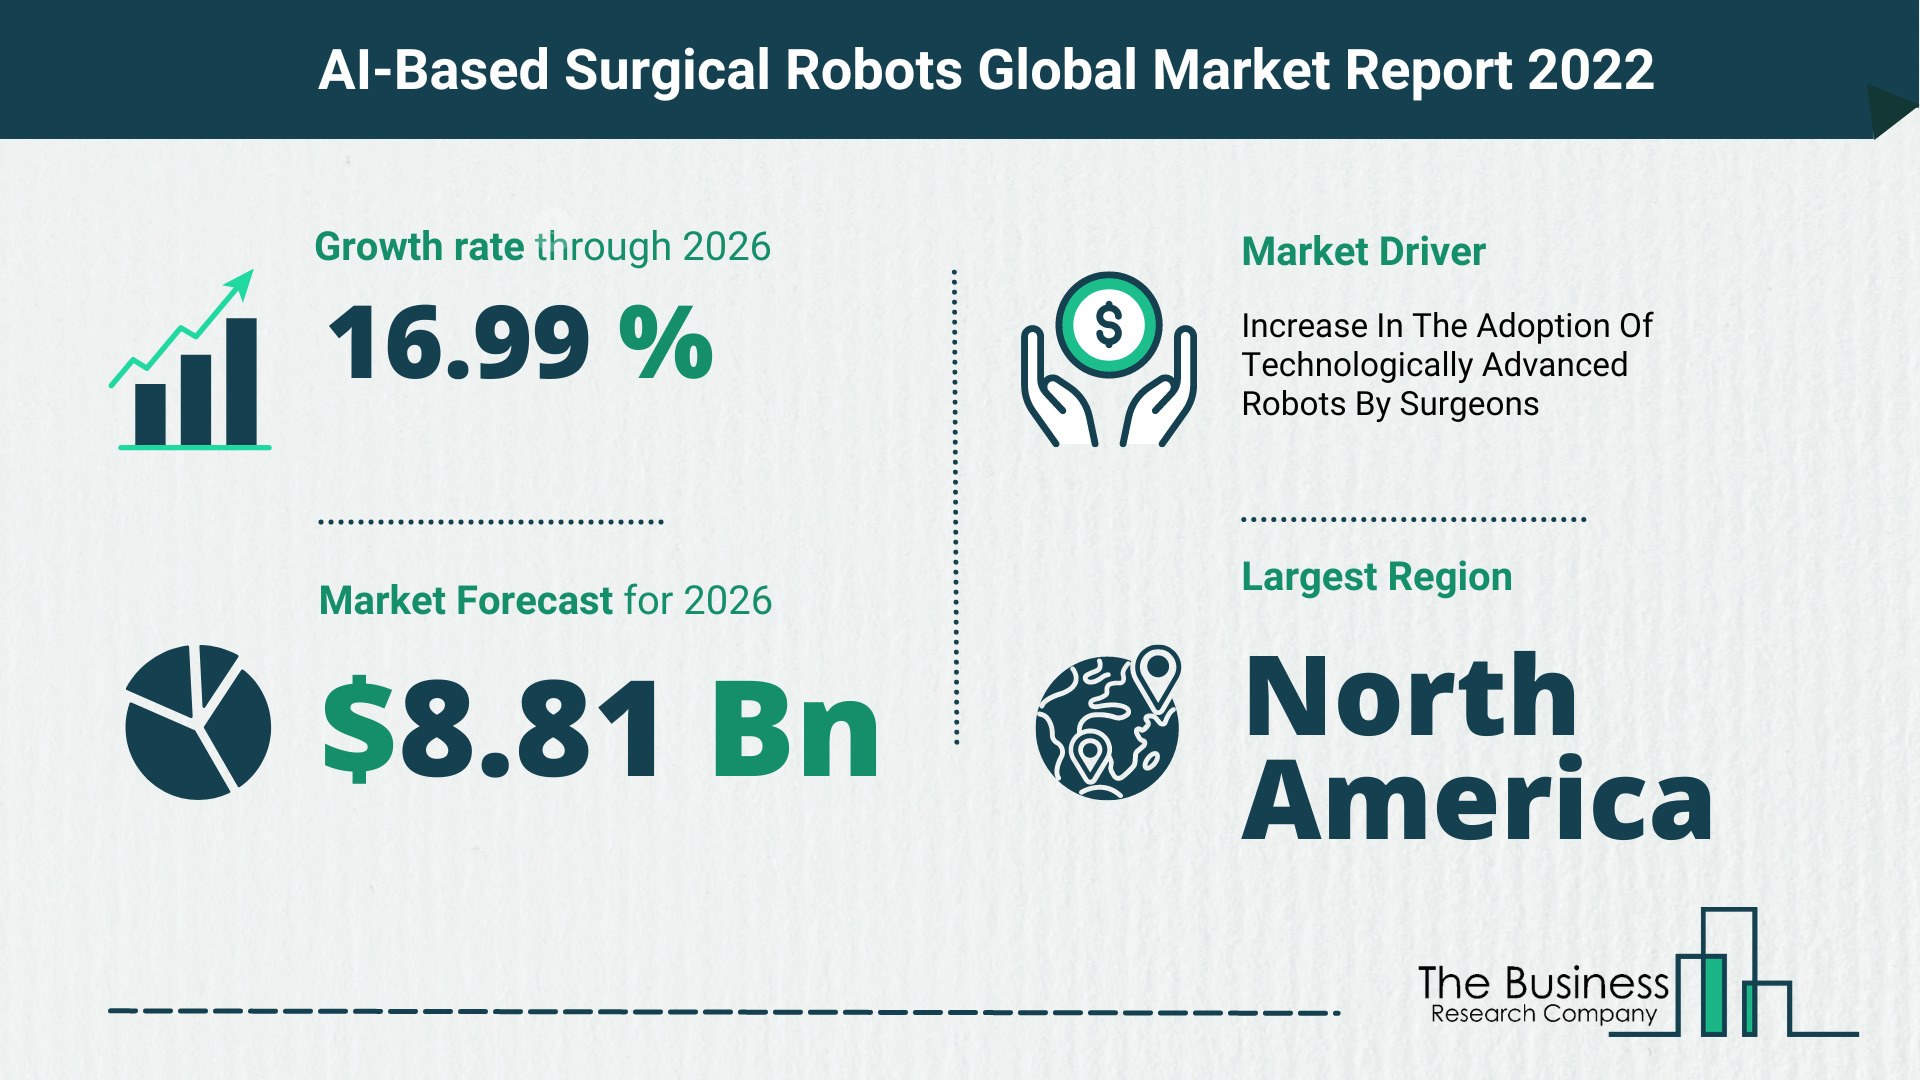 Global AI-Based Surgical Robots Market 2022 – Market Opportunities And Strategies